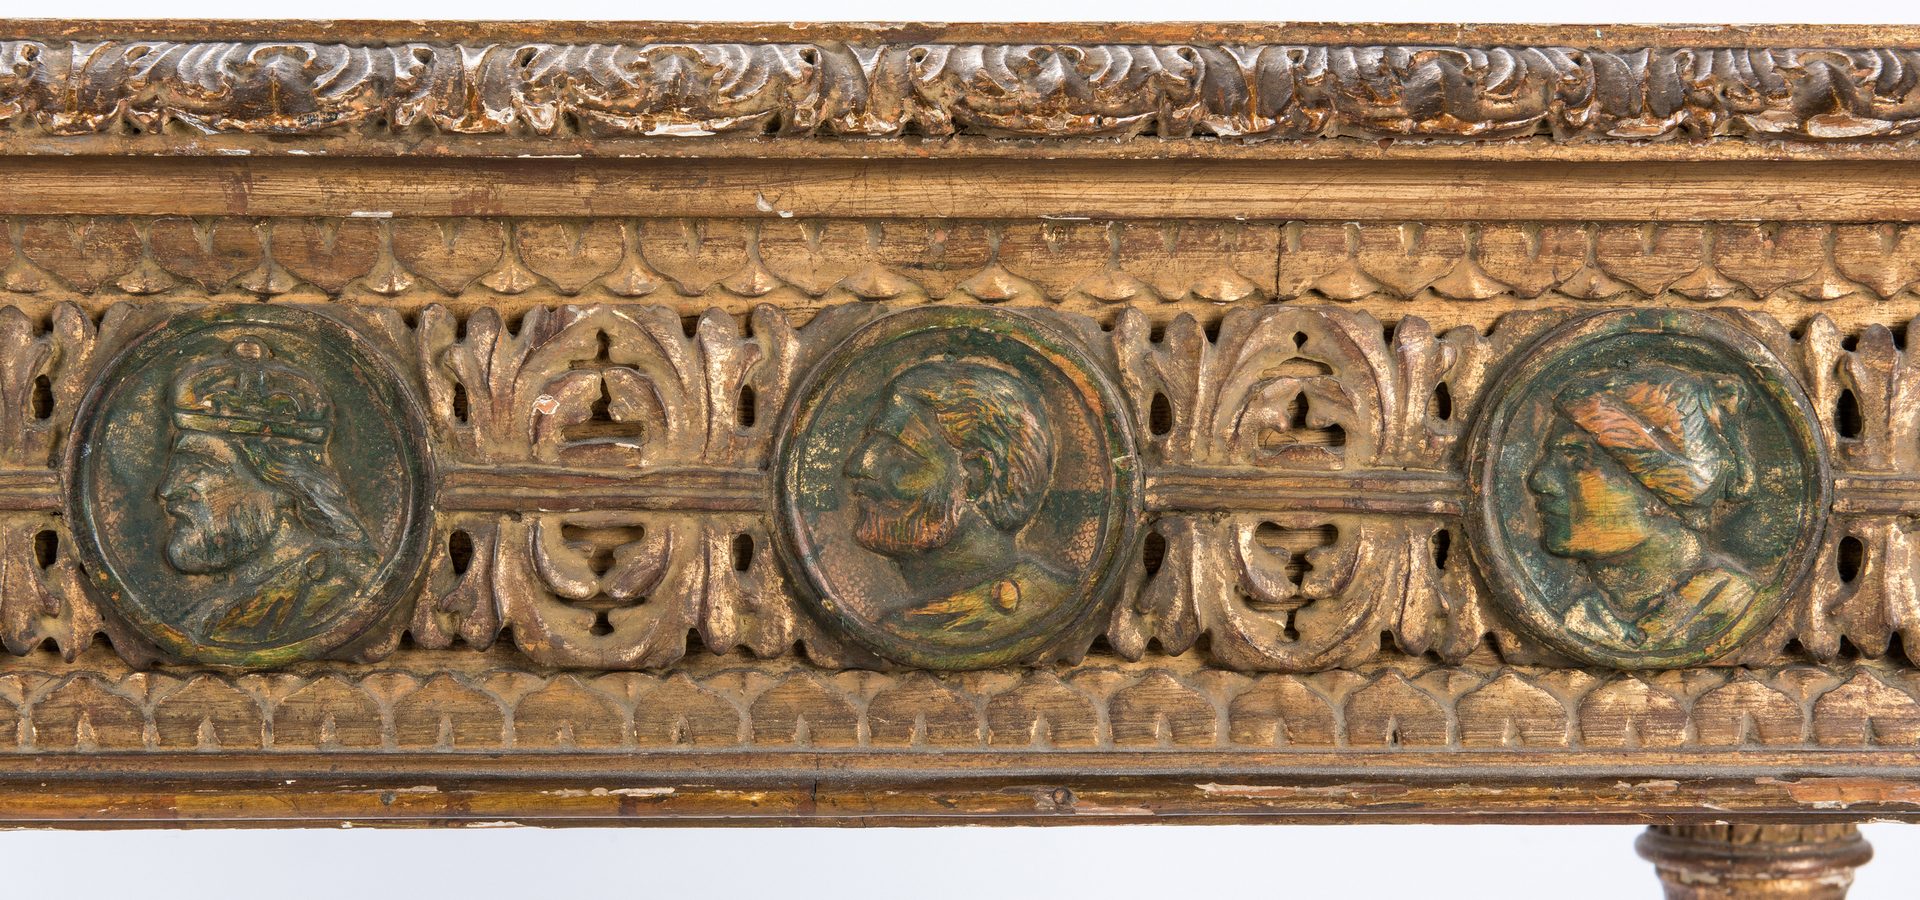 Lot 276: Italian Baroque style Carved Writing or Pier Table